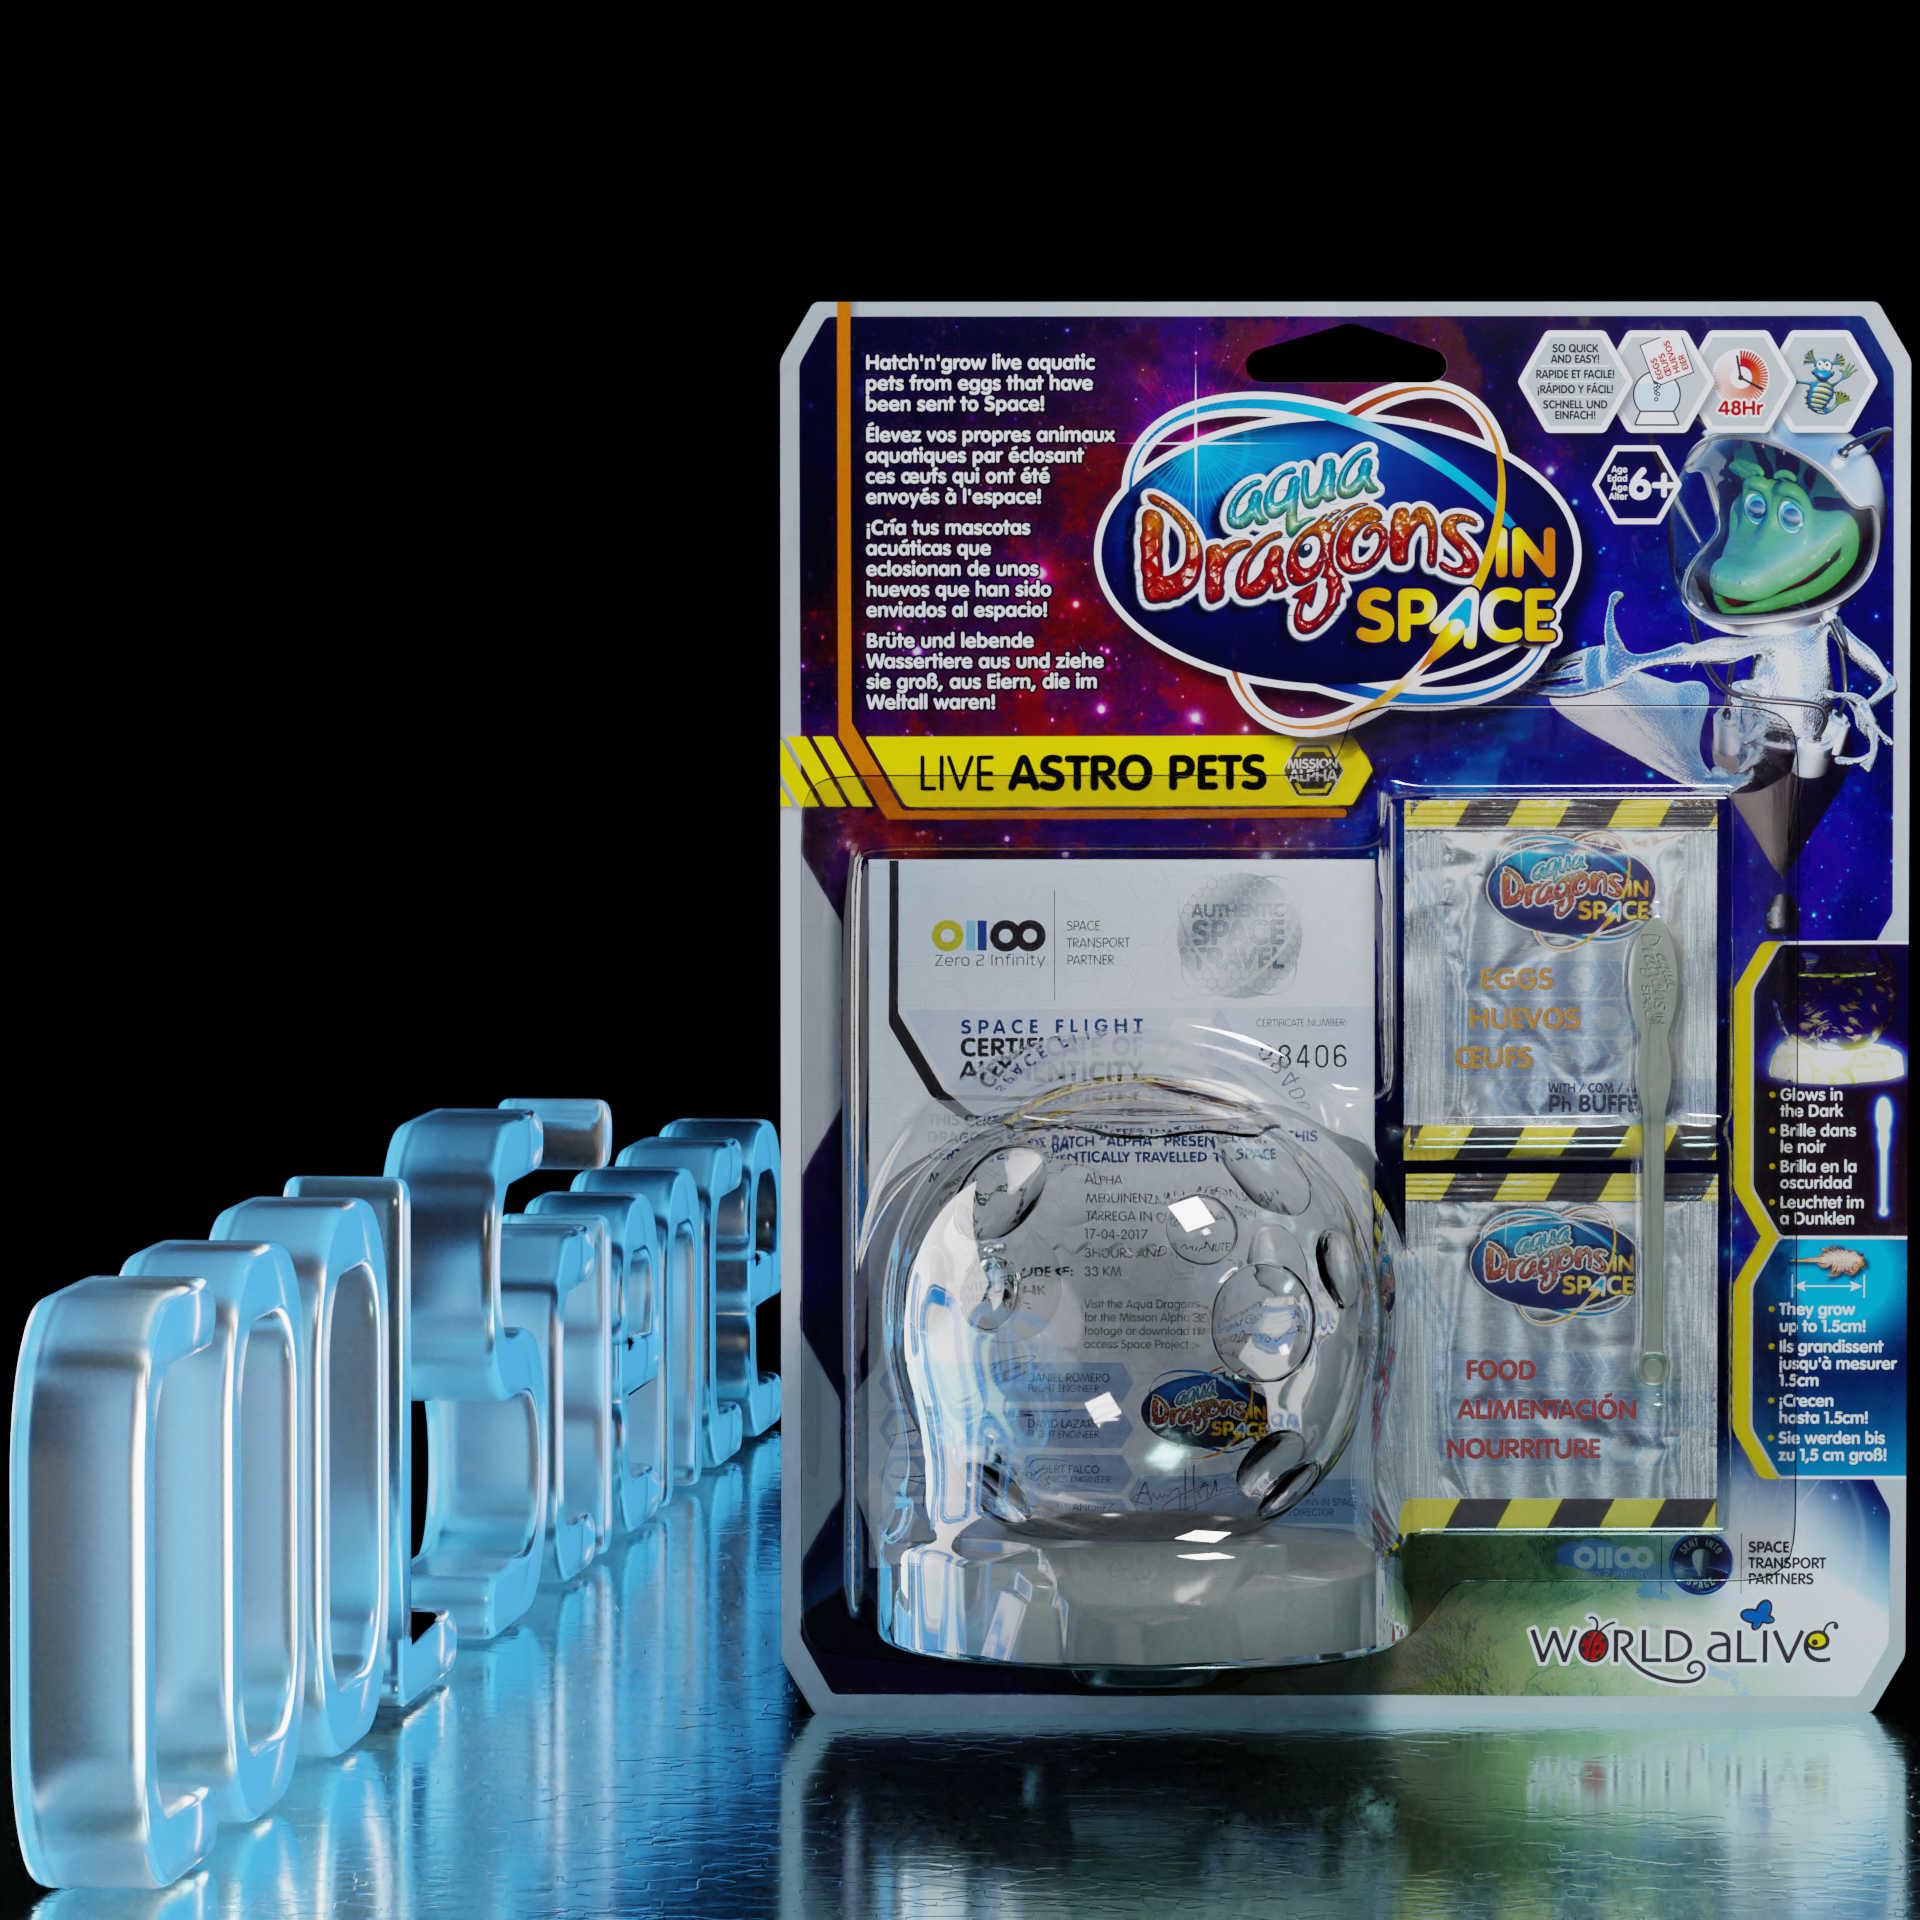 Front View of the Aqua Dragons in Space Set on plain background